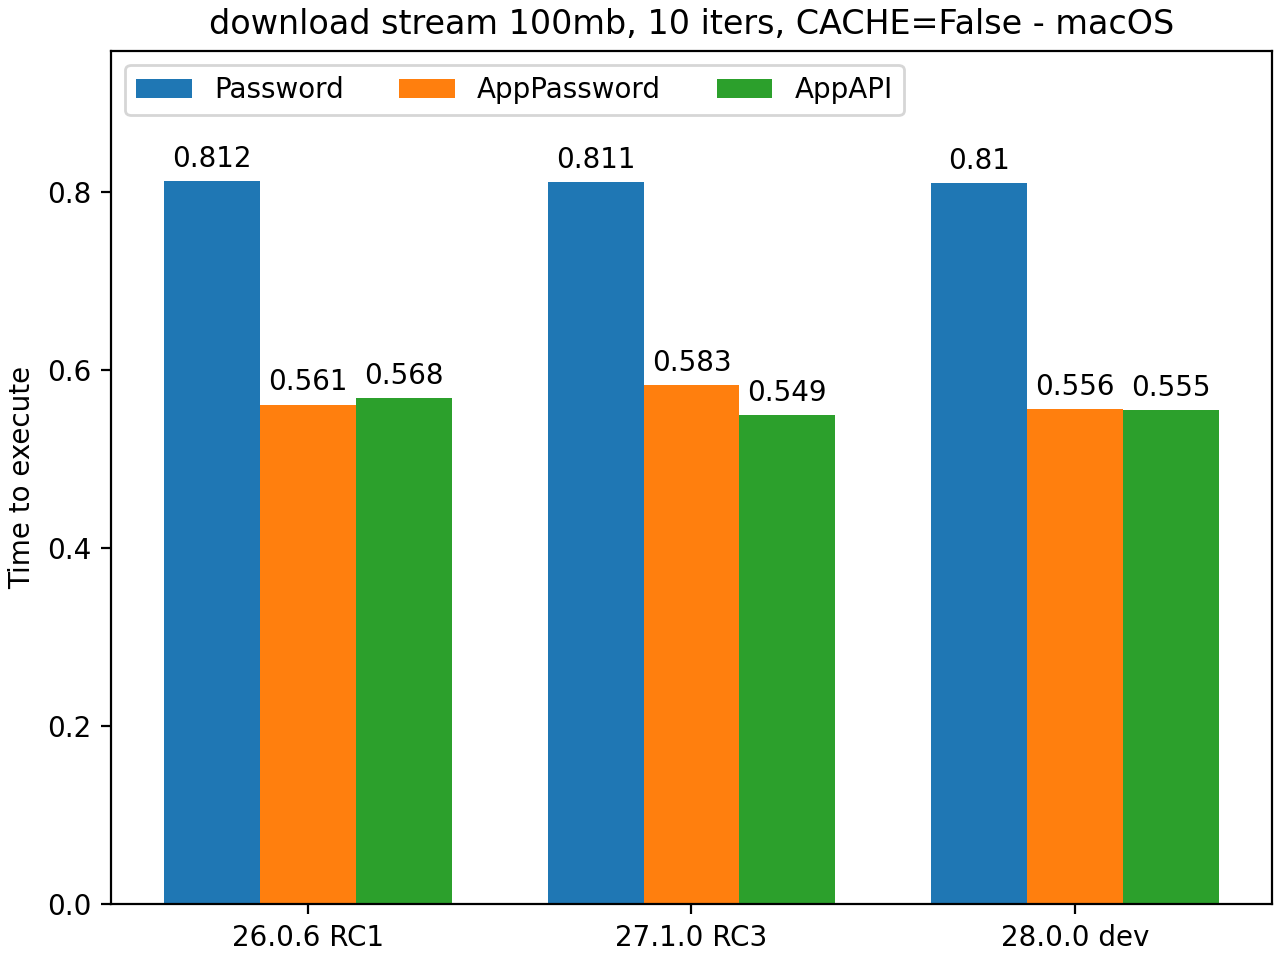 ../_images/dav_download_stream_100mb__cache0_iters10__shurik.png